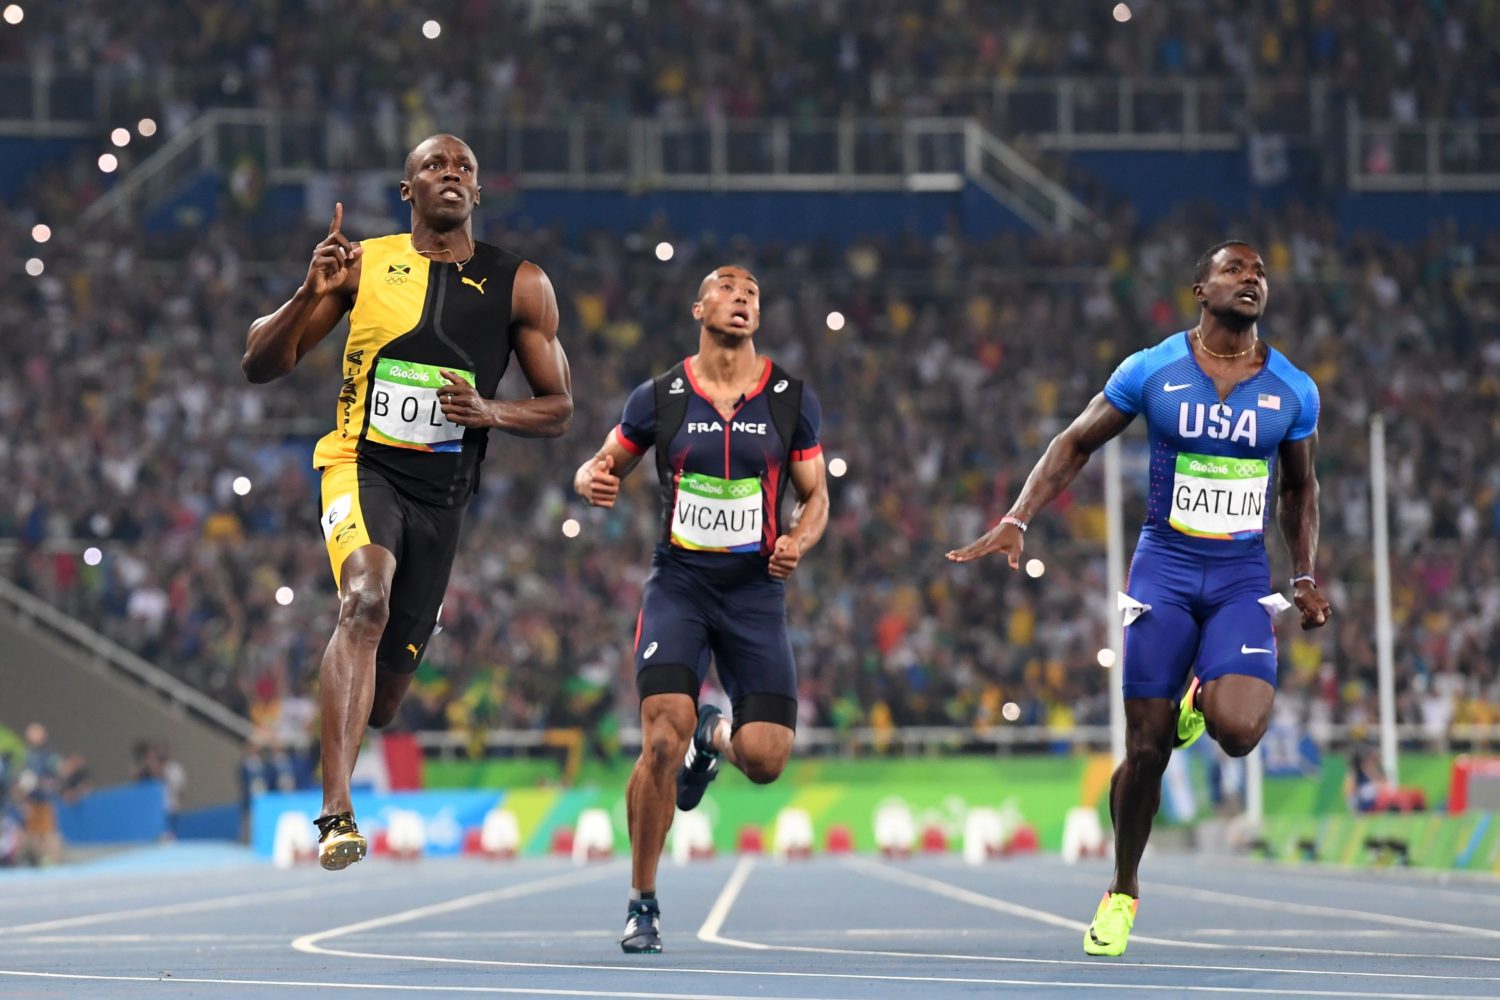 TOPSHOT - Jamaica's Usain Bolt (2ndL) crosses the finish line after he competed with France's Jimmy Vicaut (2ndR) and USA's Justin Gatlin to win the Men's 100m Final during the athletics event at the Rio 2016 Olympic Games at the Olympic Stadium in Rio de Janeiro on August 14, 2016.   / AFP PHOTO / OLIVIER MORIN